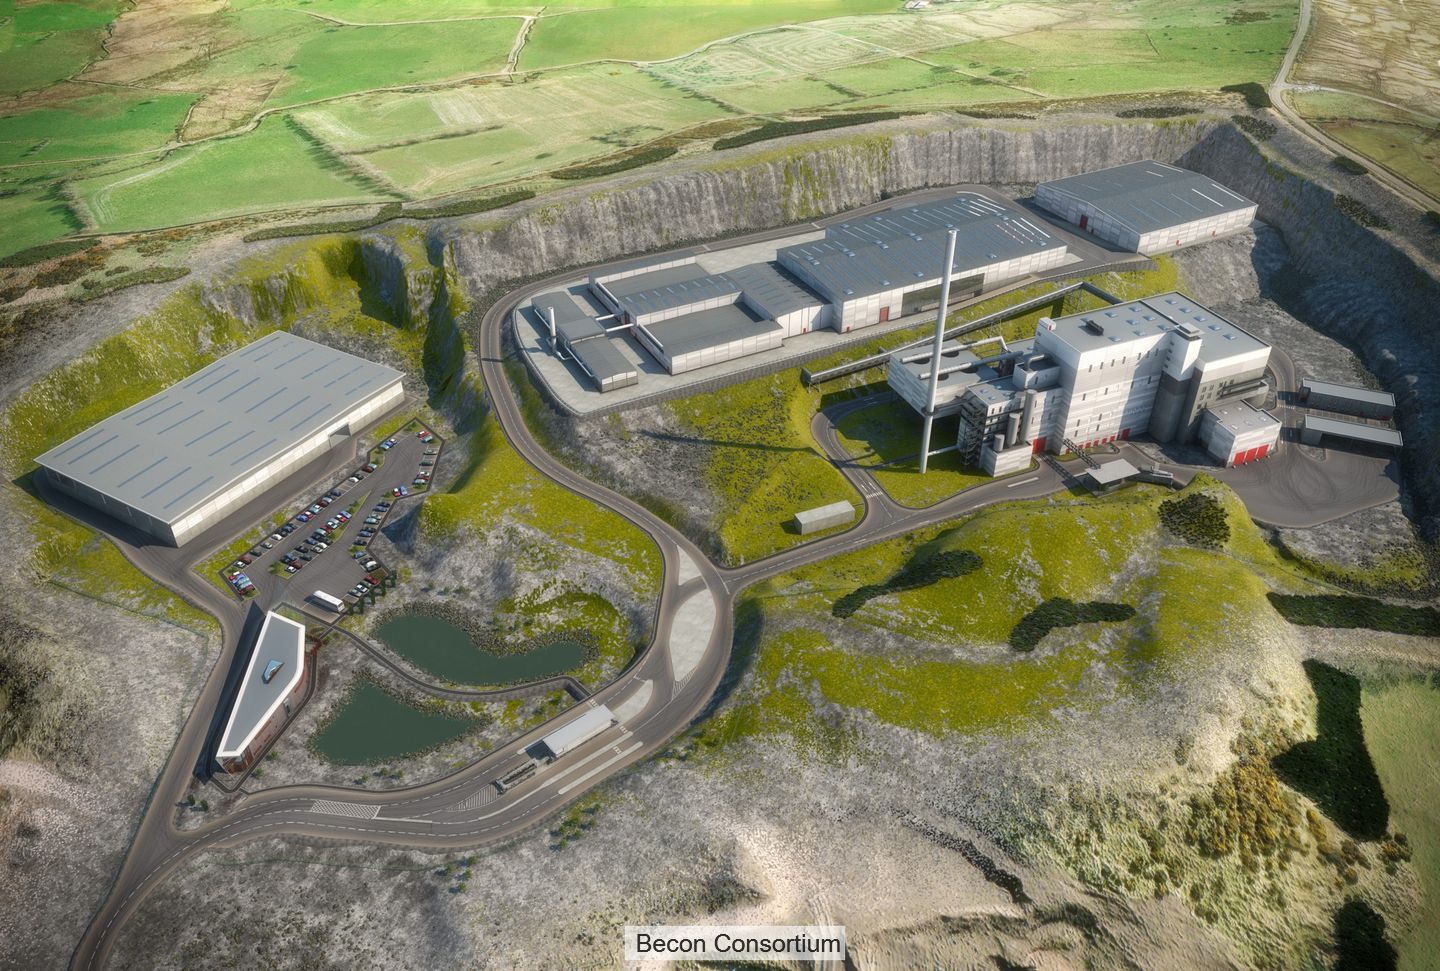 Illustration of planned ARC21 residual waste treatment plant, near Belfast in Northern Ireland